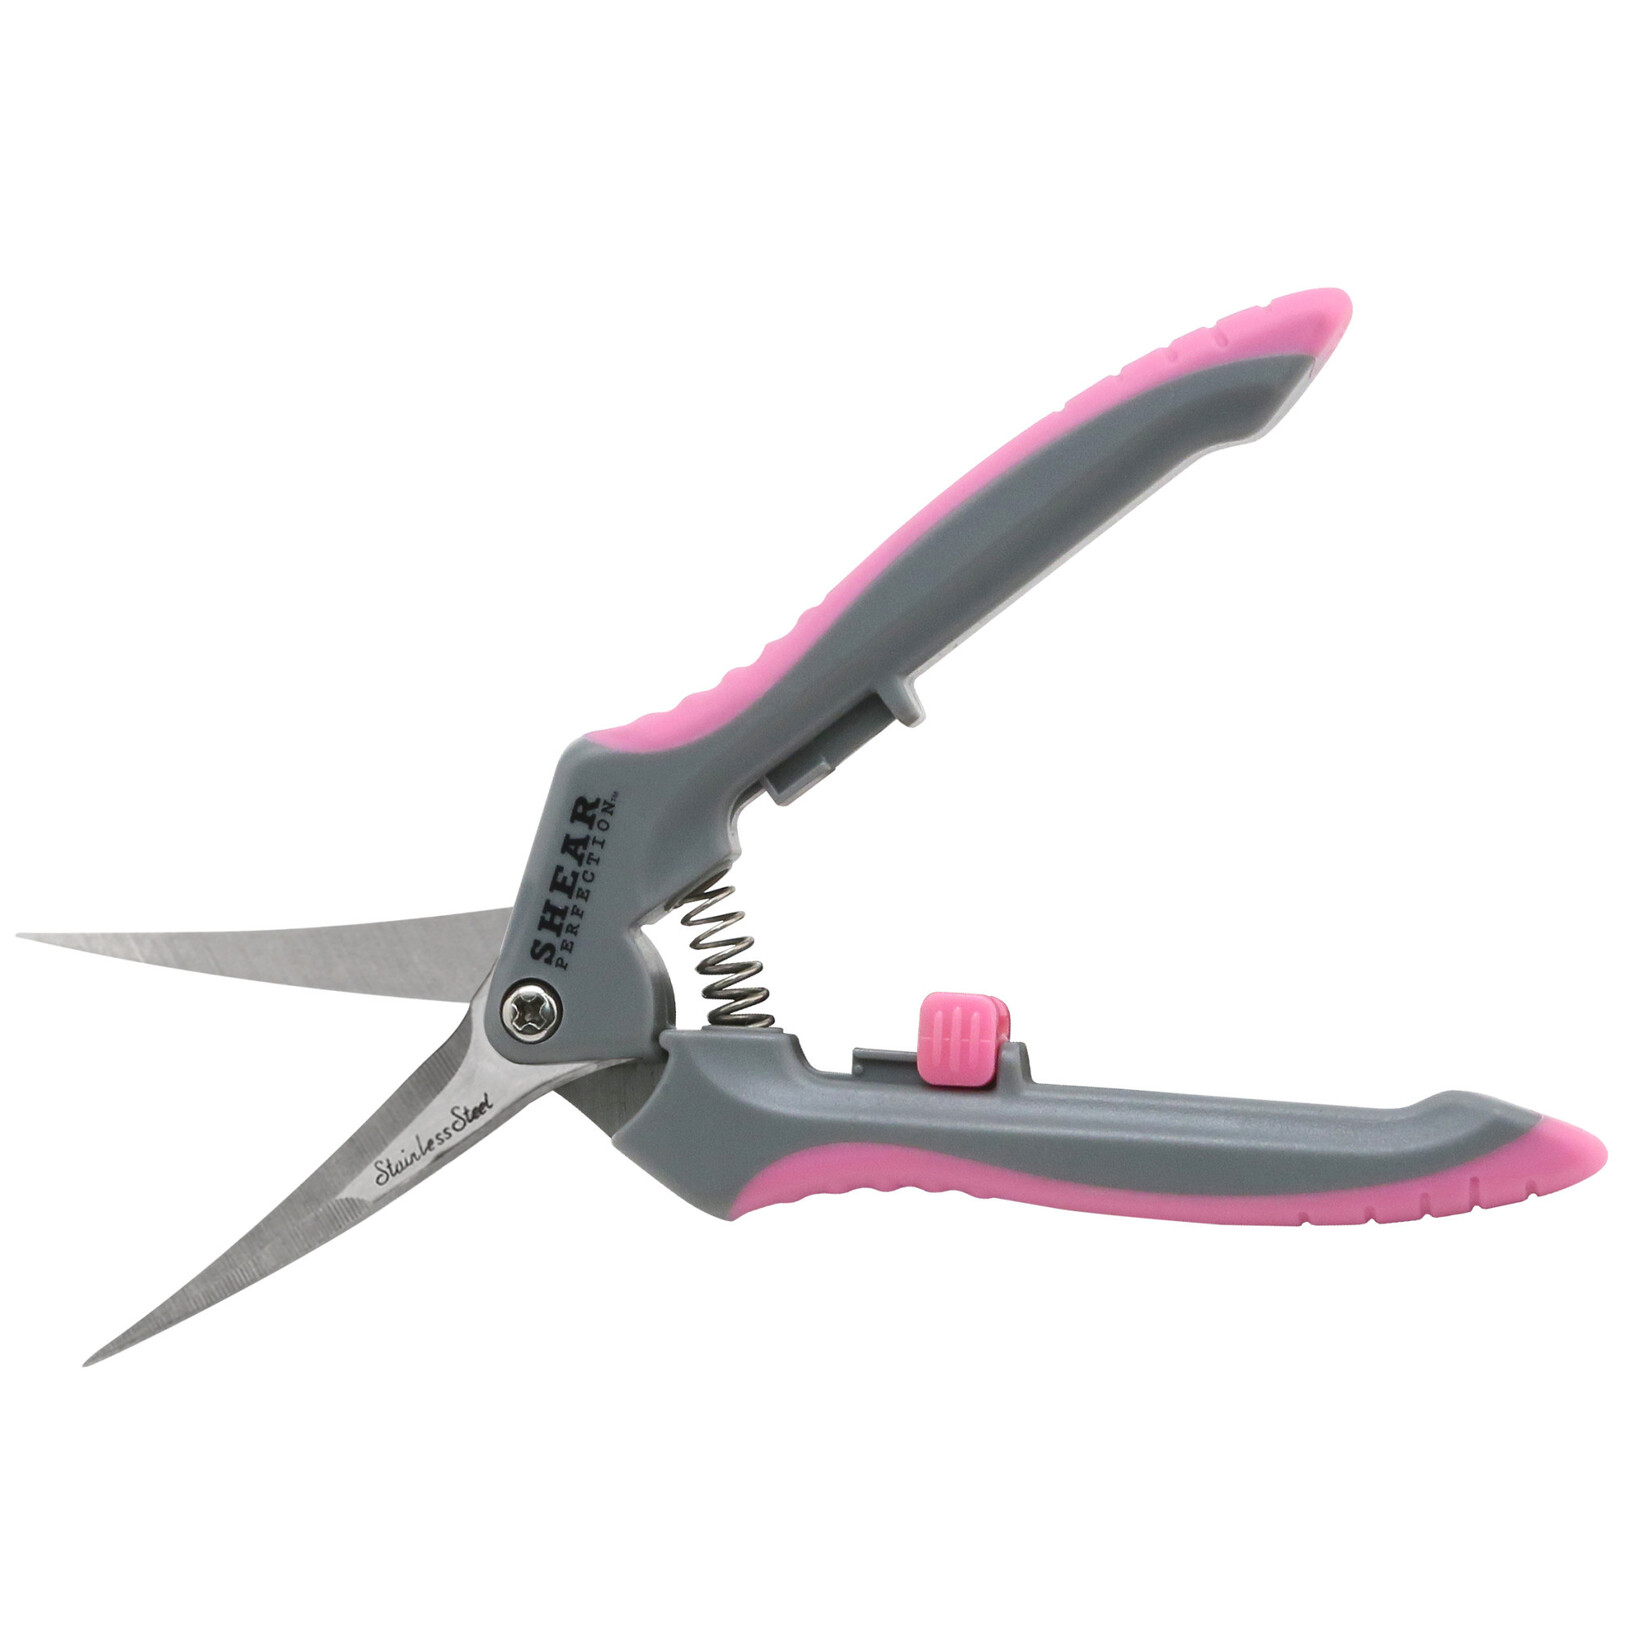 Shear Perfection Pink Platinum Stainless Trimming Shear - 2 in Curved Blades